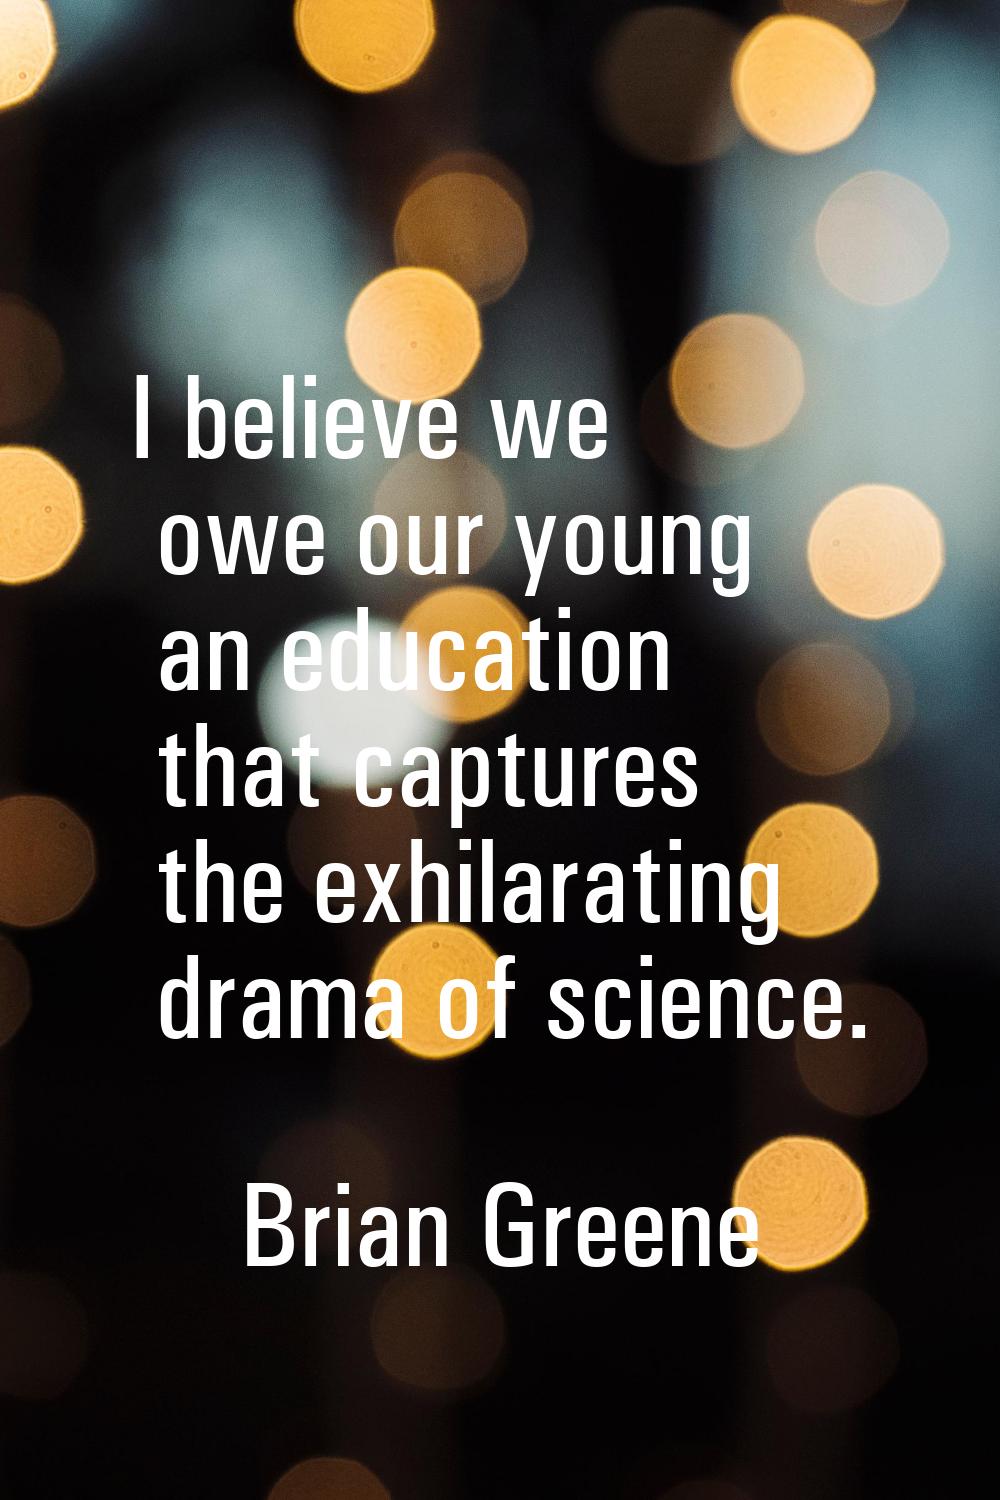 I believe we owe our young an education that captures the exhilarating drama of science.